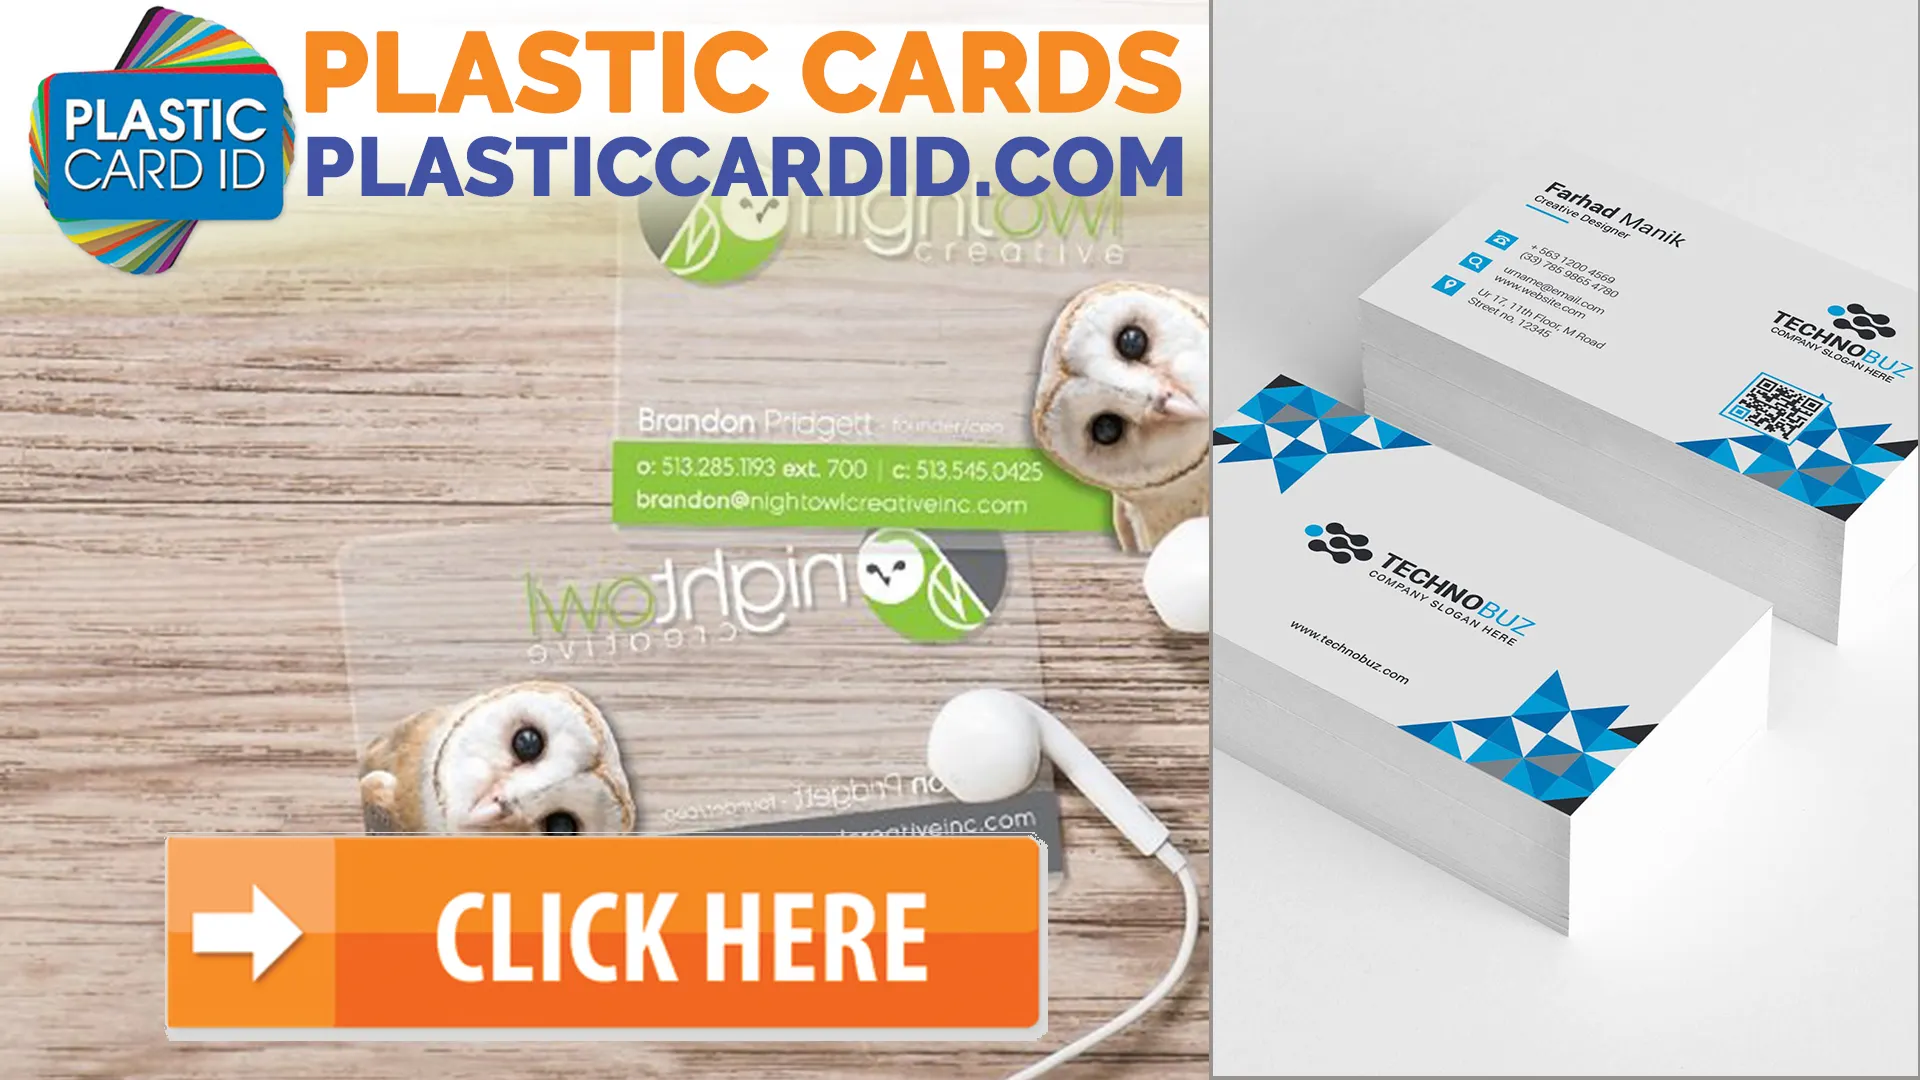 Our Plastic Card Solutions